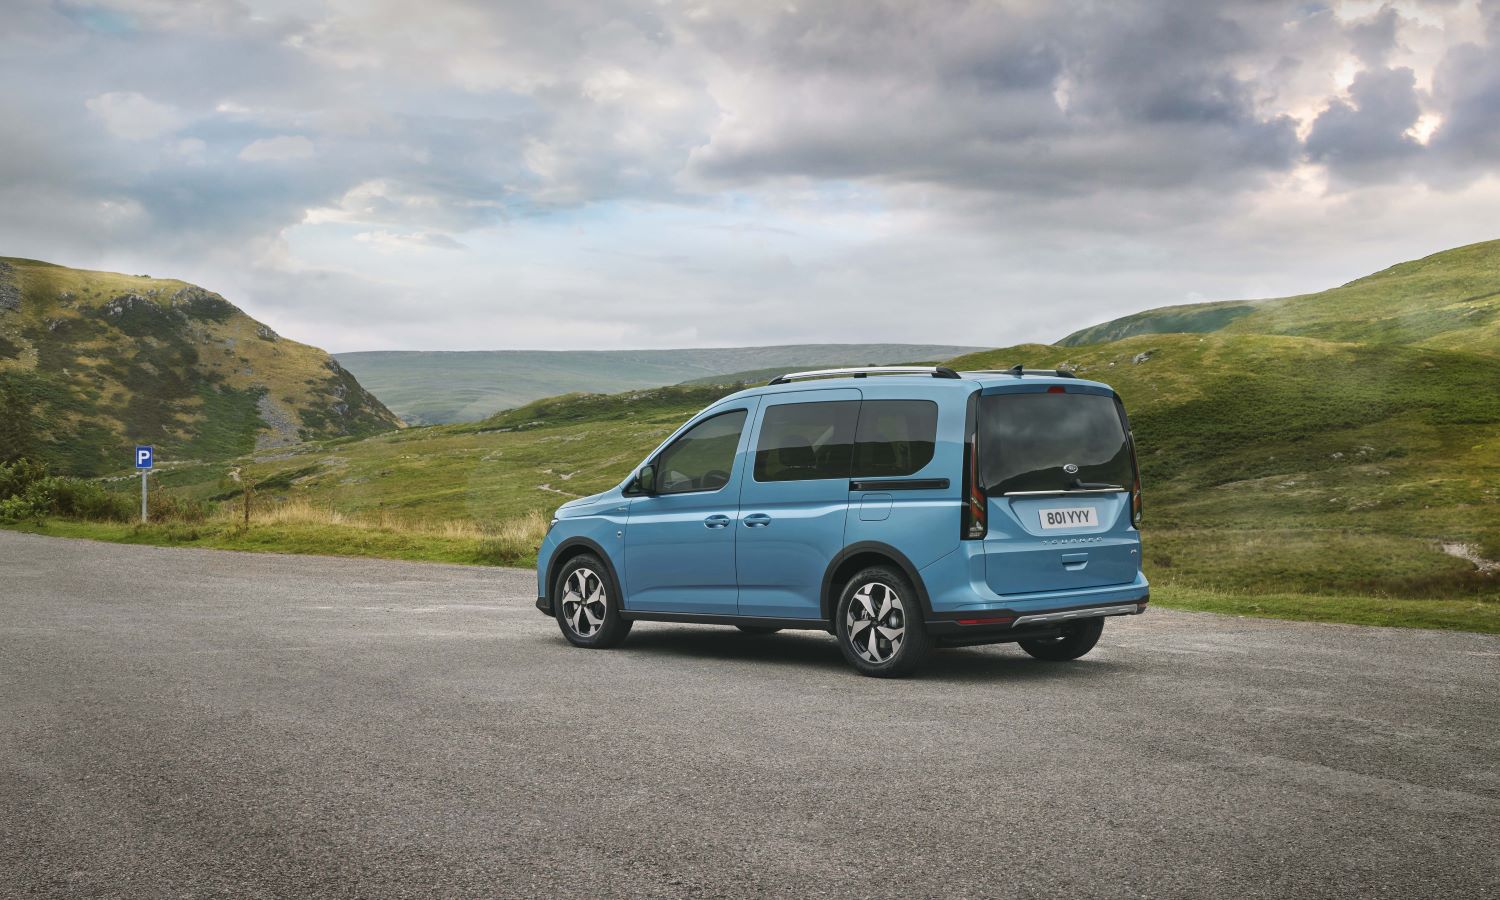 2022 Ford Tourneo Connect Revealed As VW Caddy Derivative